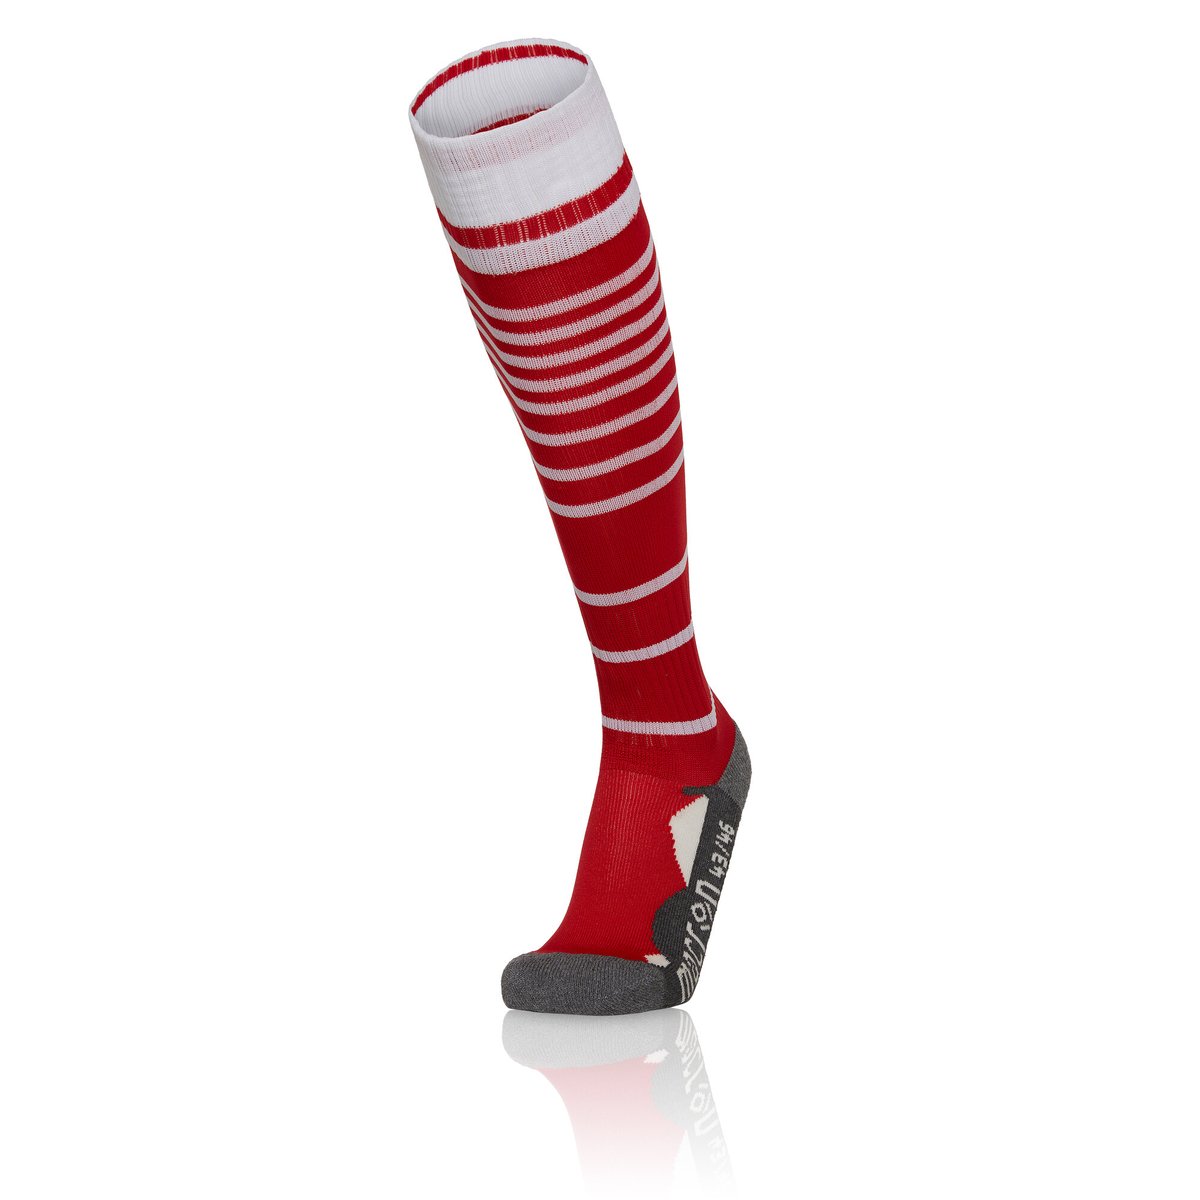 Macron Target Match Sock - Red/White (Pack of 5)